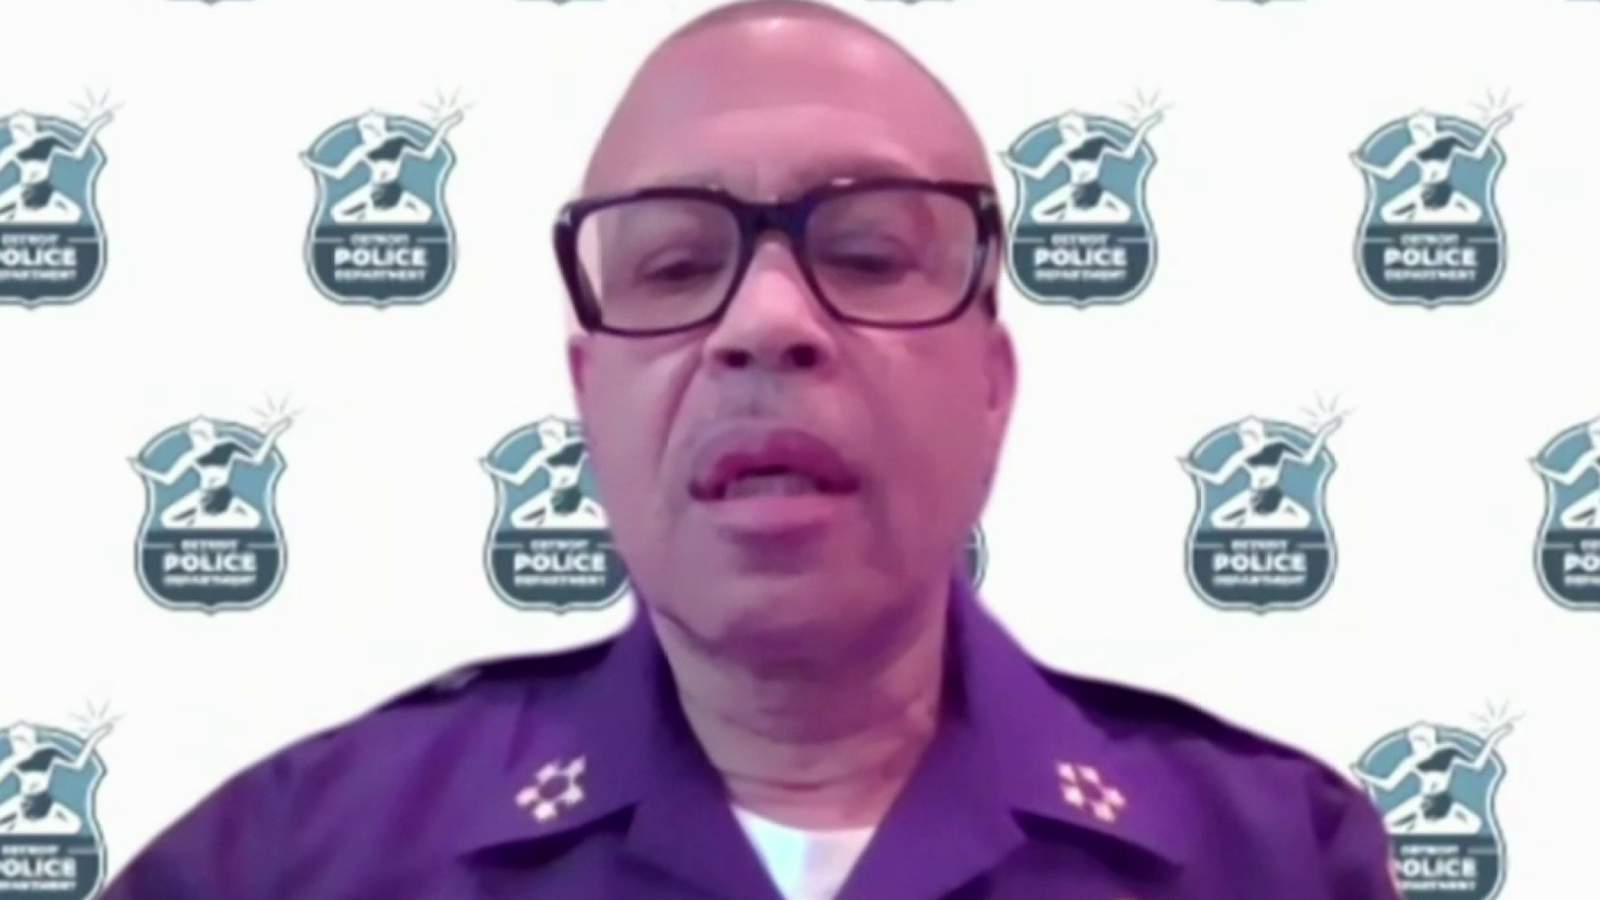 Detroit police chief responds to deadly officer involved shooting